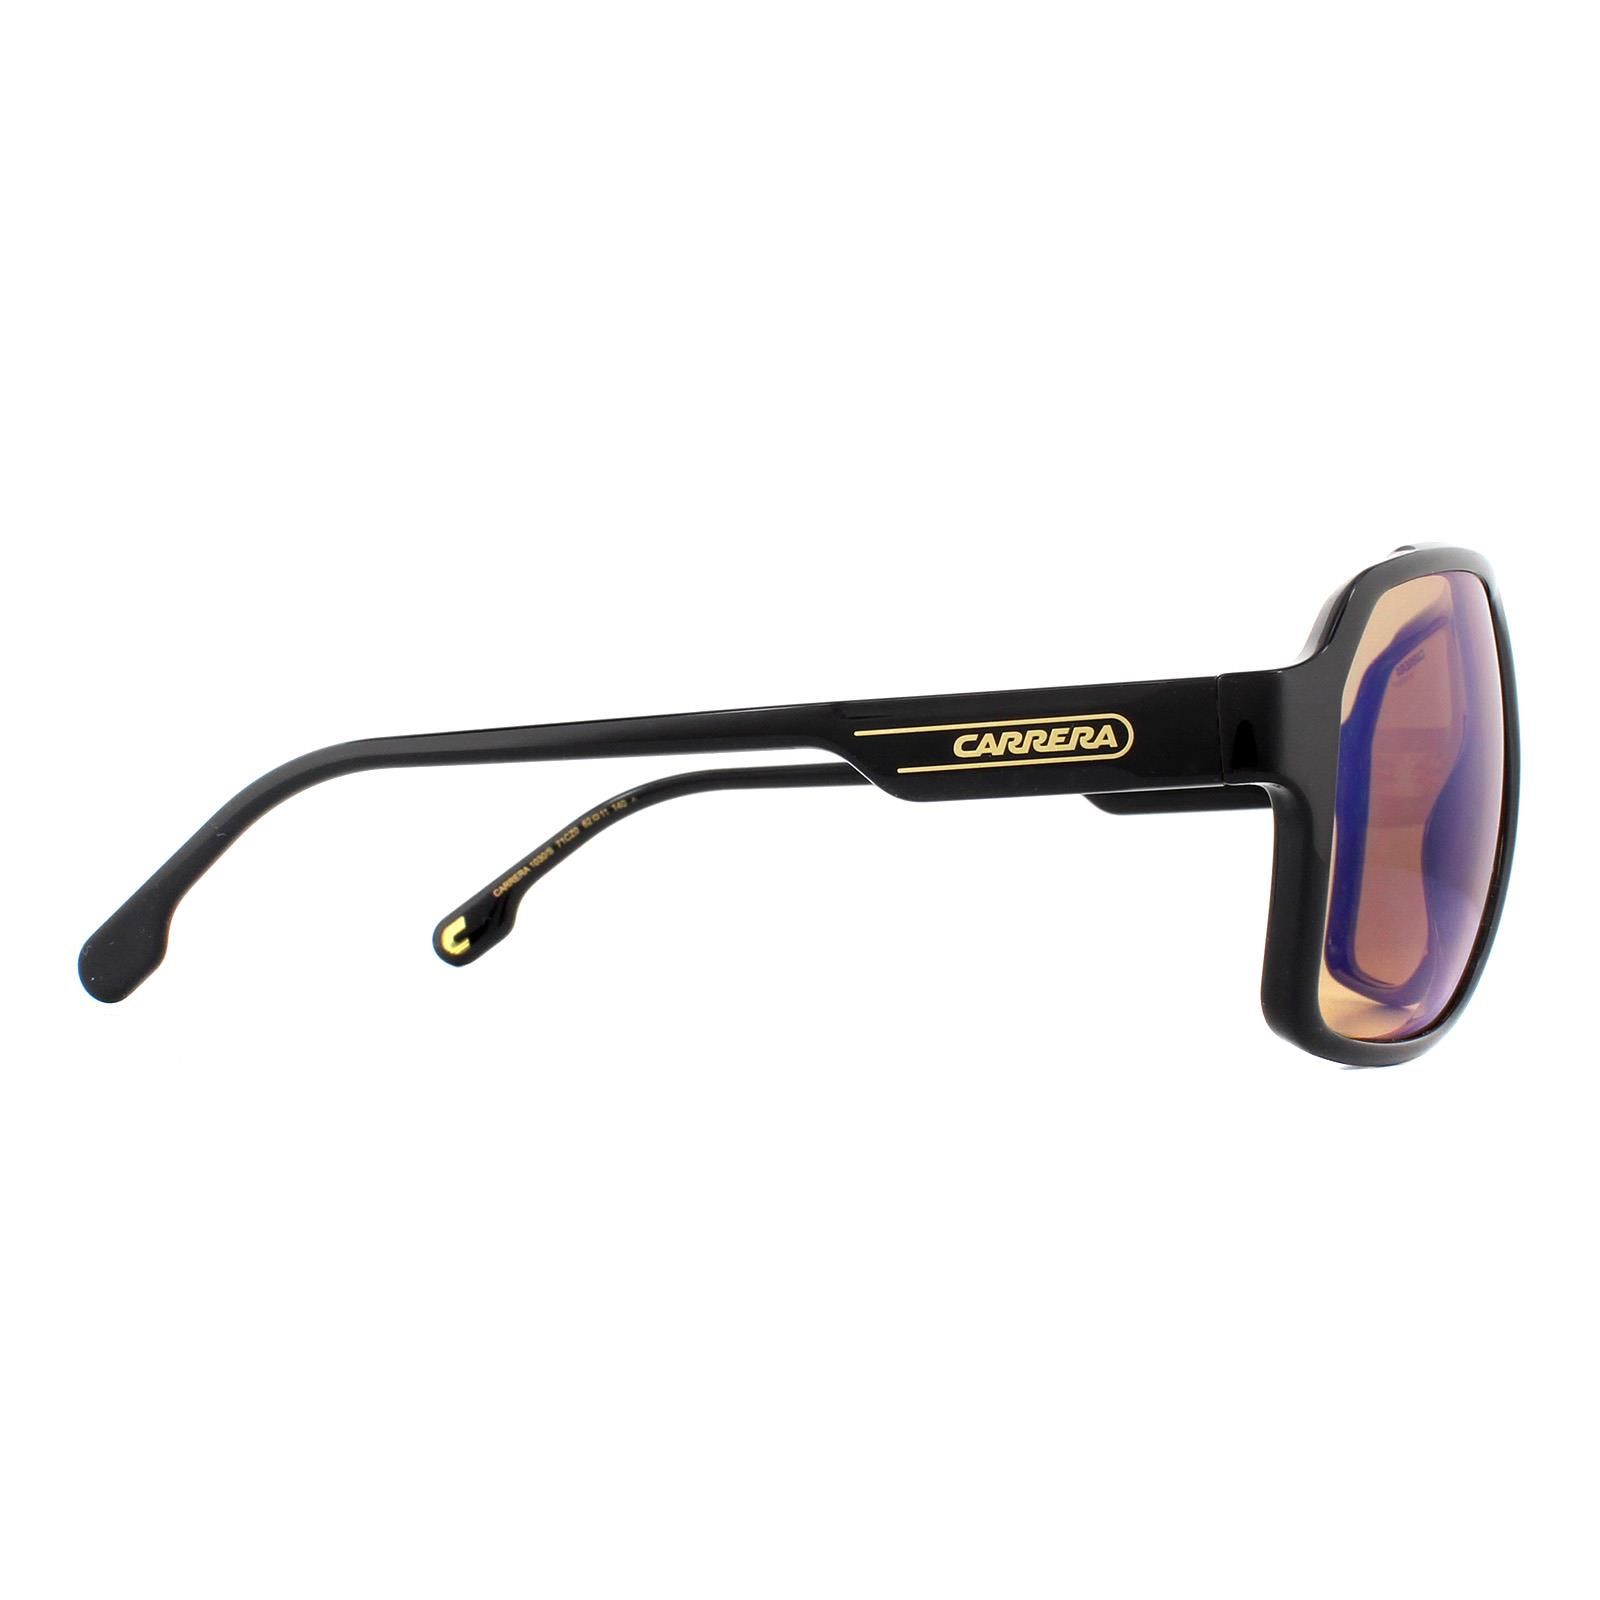 Carrera Sunglasses 1030/S 71C Z0 Black Yellow are a classic Carrera style with large lenses and signature branding on the temples and frame front.